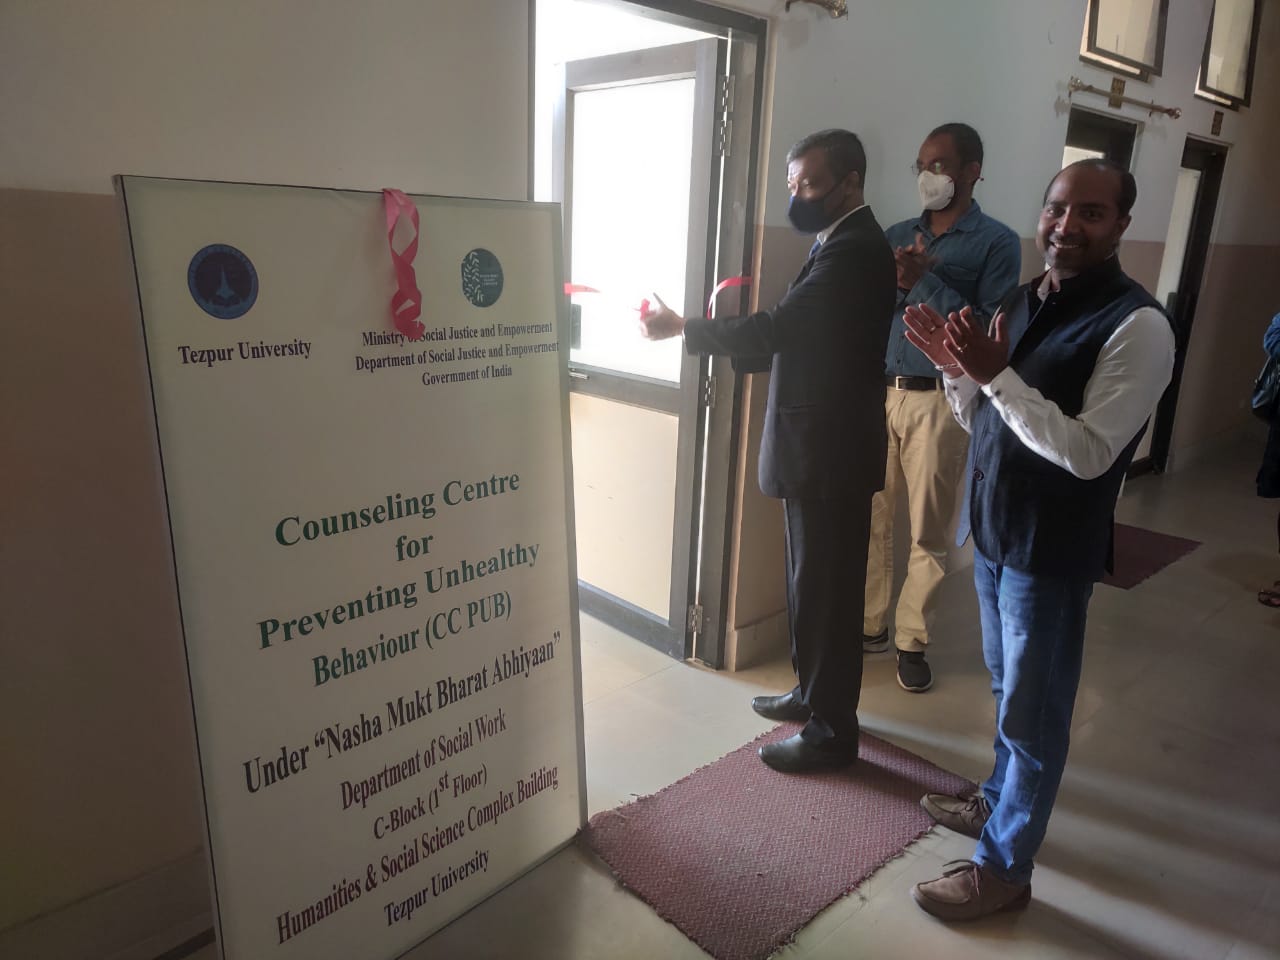 “Counseling Centre for Preventing Unhealthy Behaviour” (“CC-PUB”)] has been  set up at Department of Social Work.